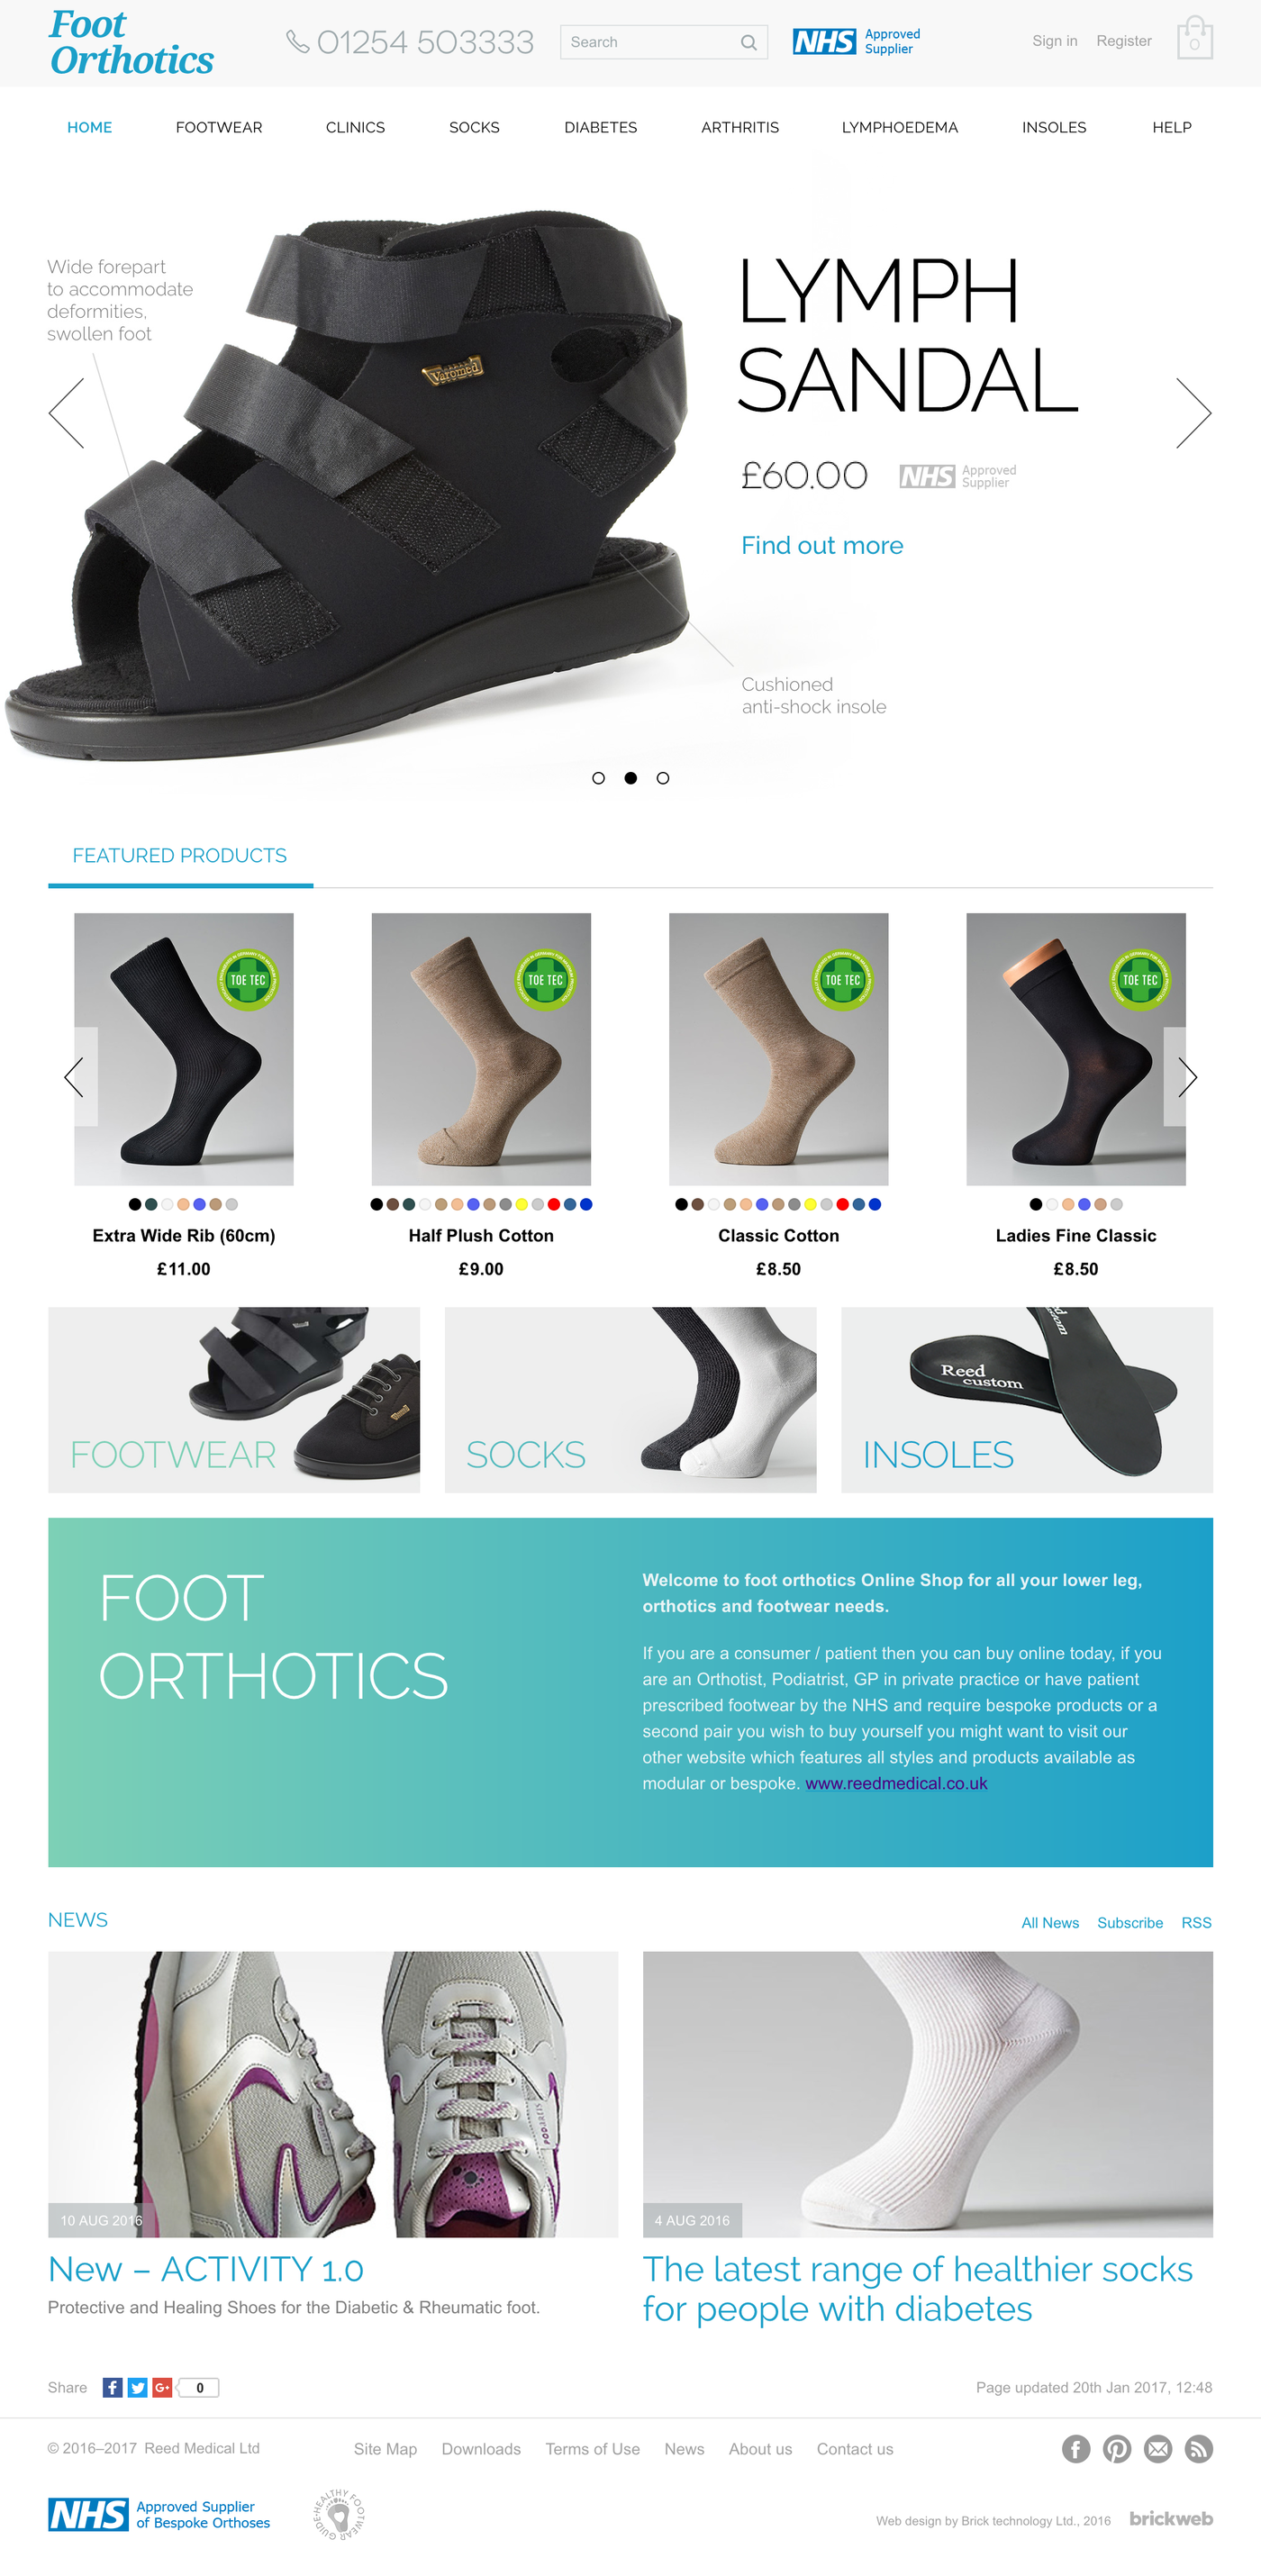 Foot Orthotics Home page